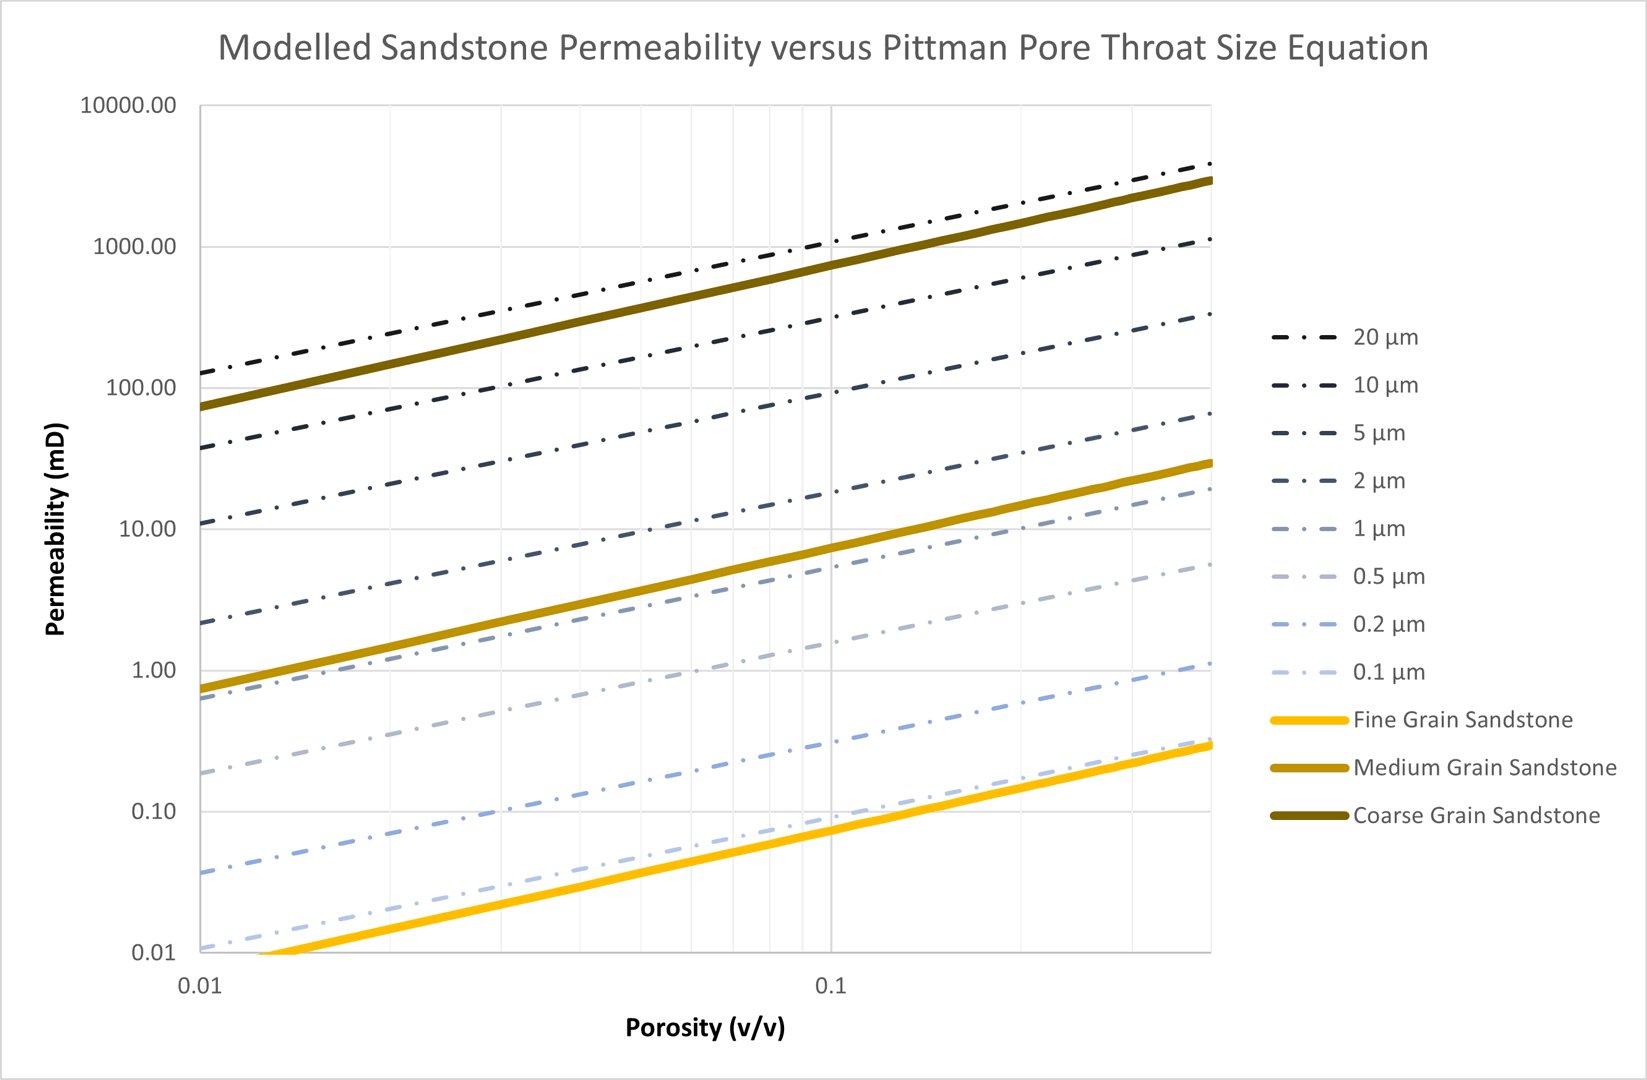 Match of modelled permeability equation against Pittman pore throat size equation.